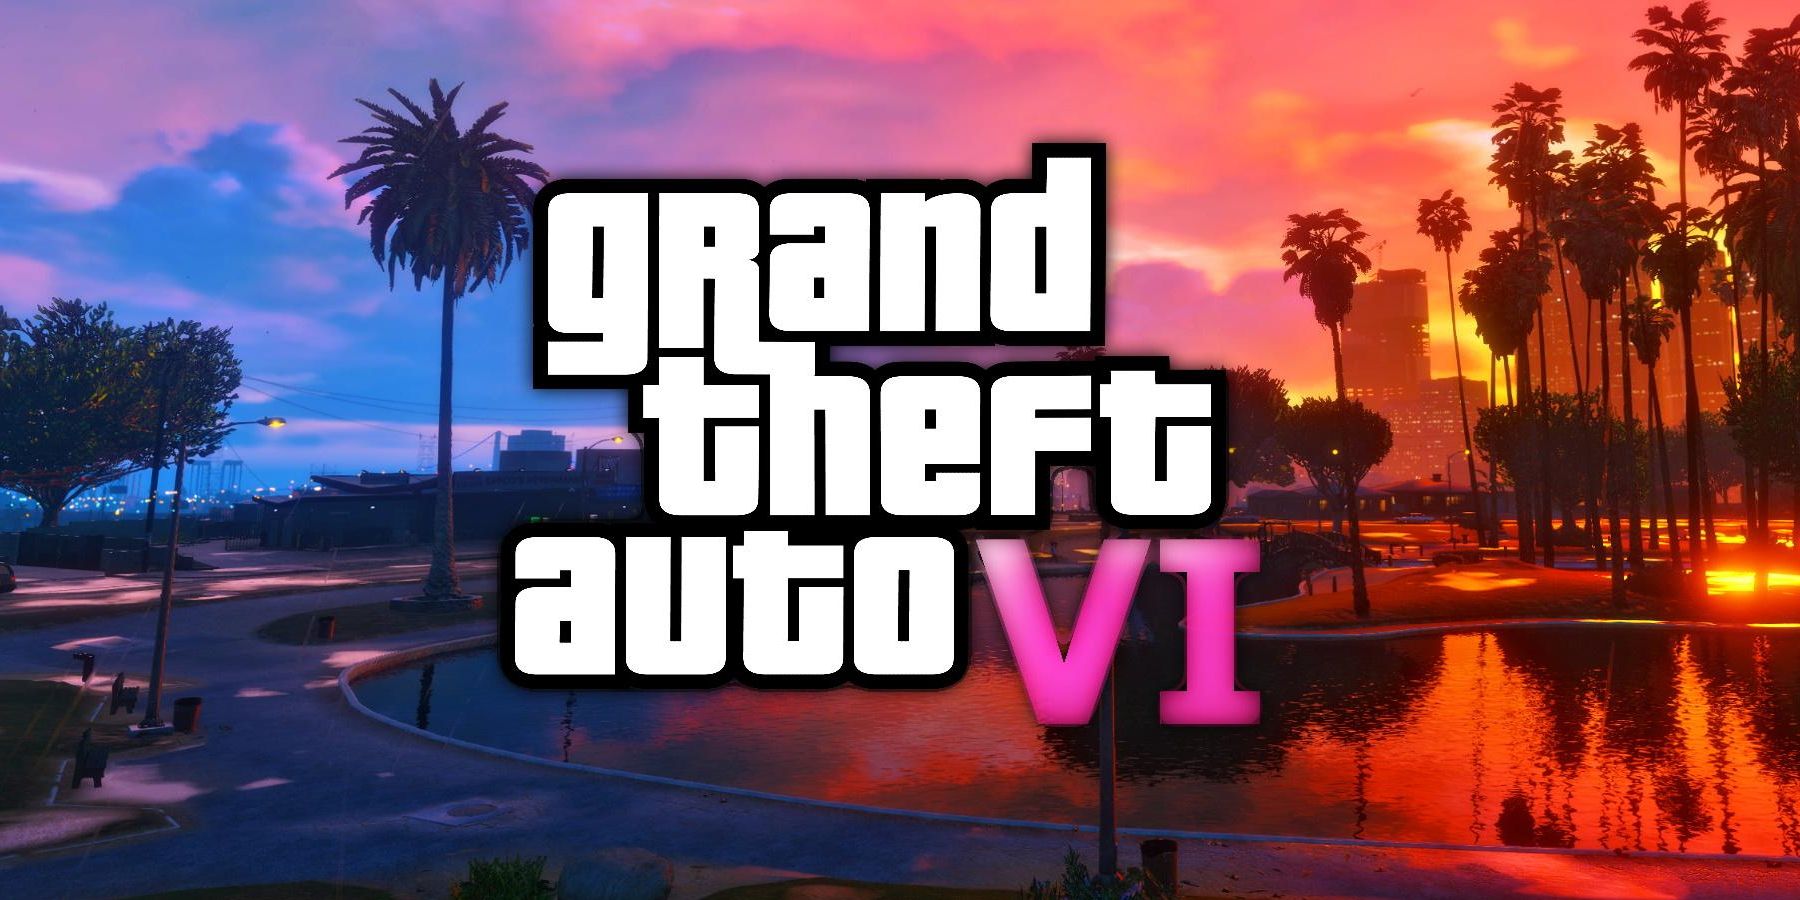 New GTA 6 leaks allege the game will feature the franchise's first